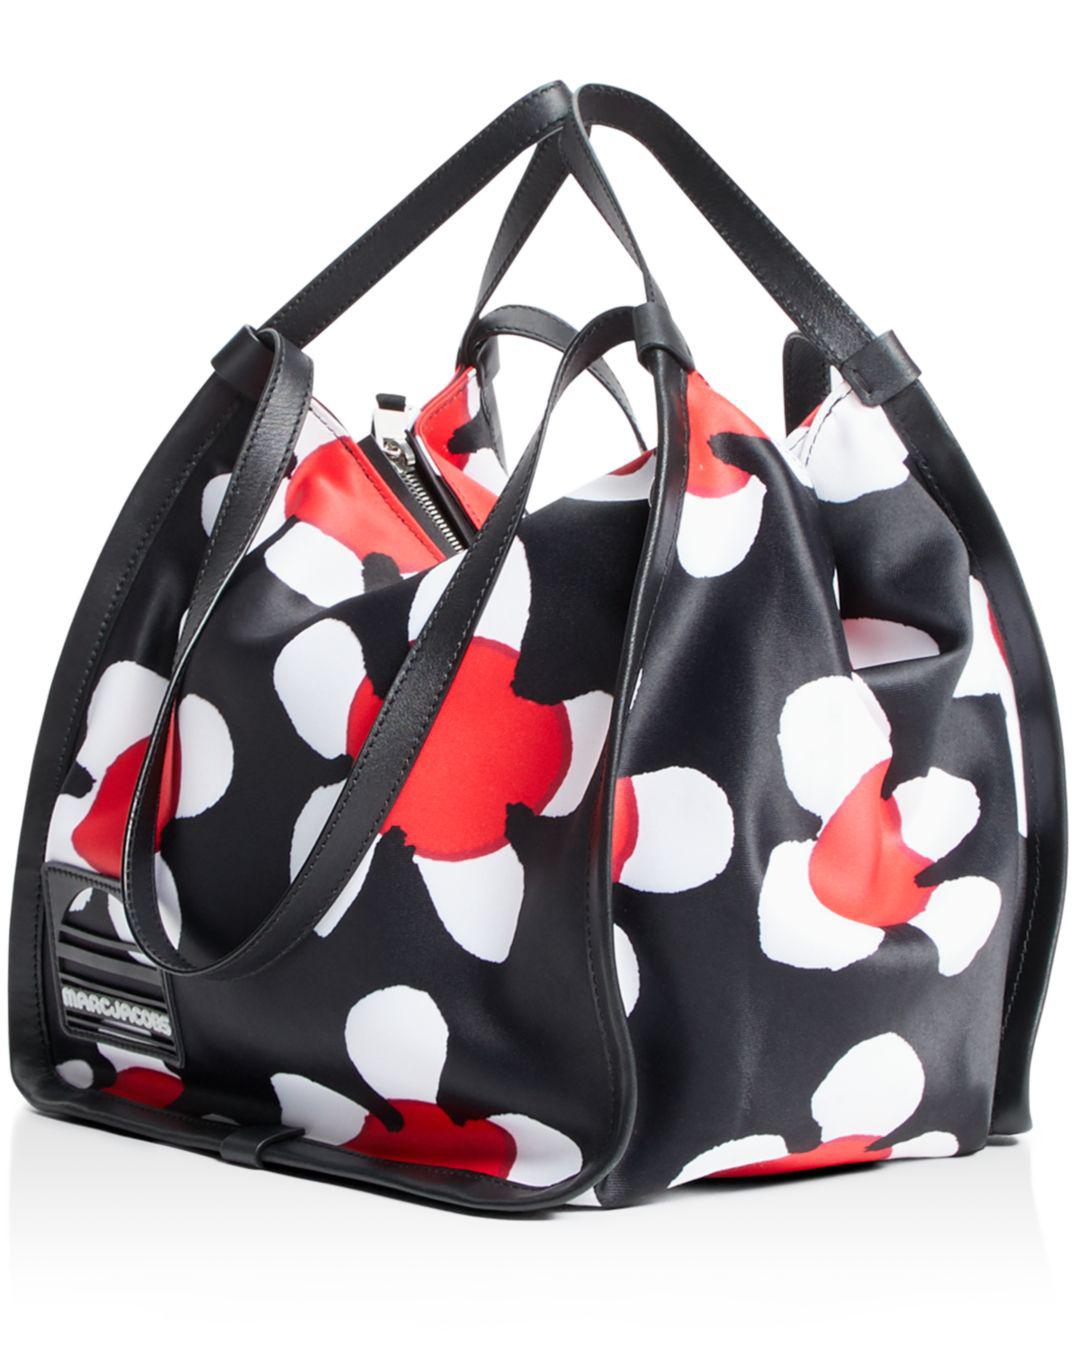 Marc Jacobs Floral Print Sport Tote in Red | Lyst